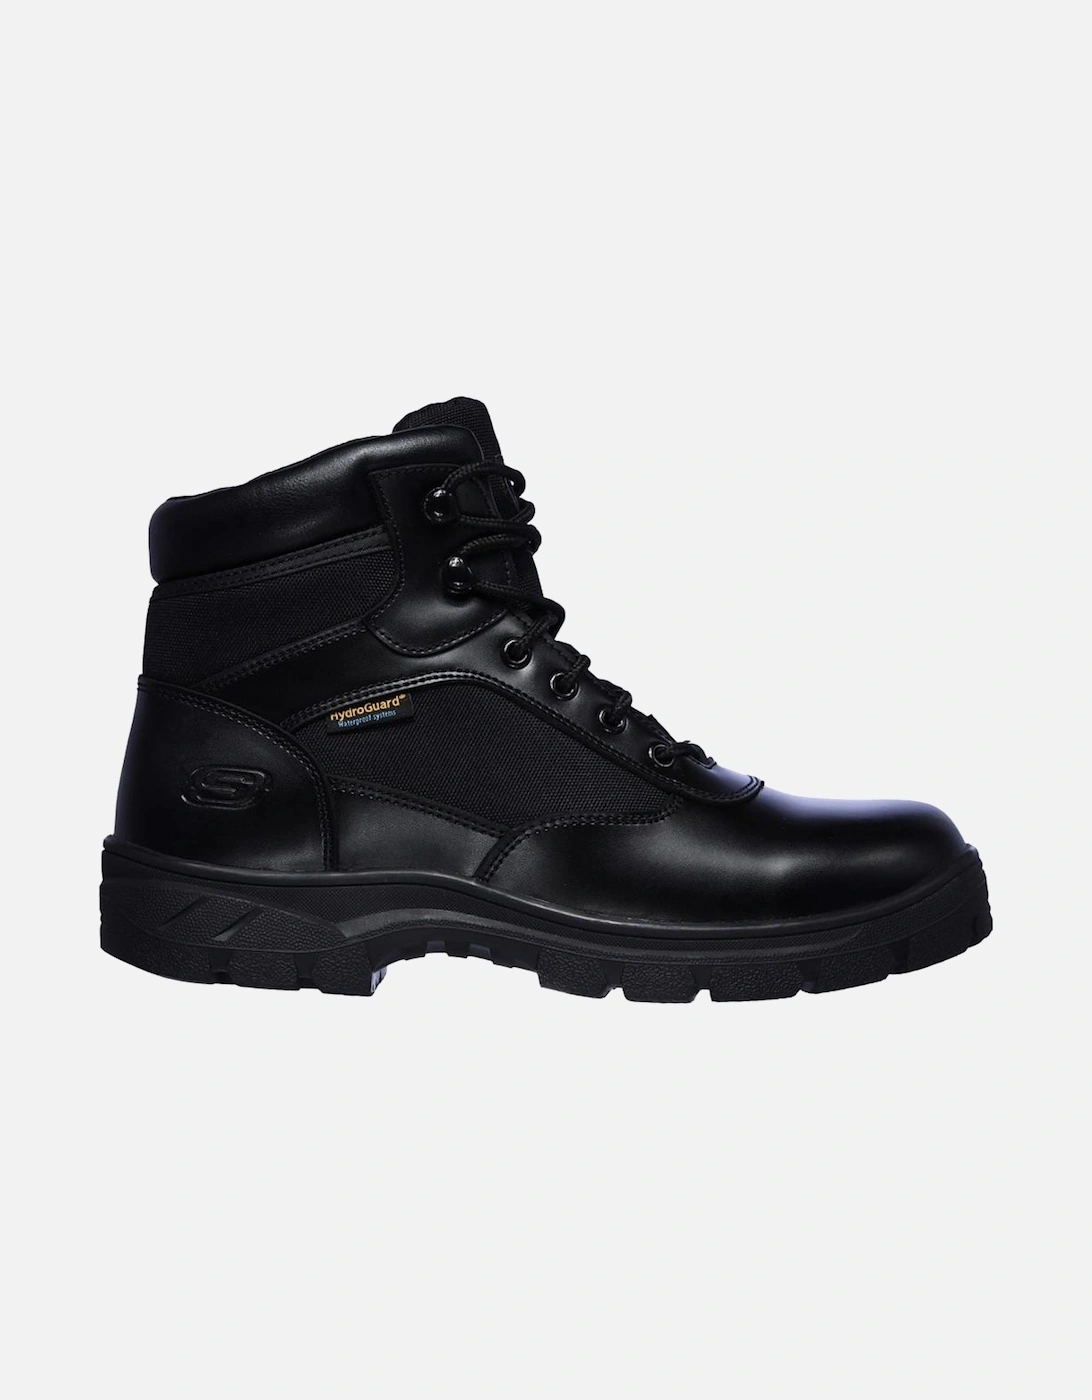 Mens Wascana Benen Leather Safety Boots